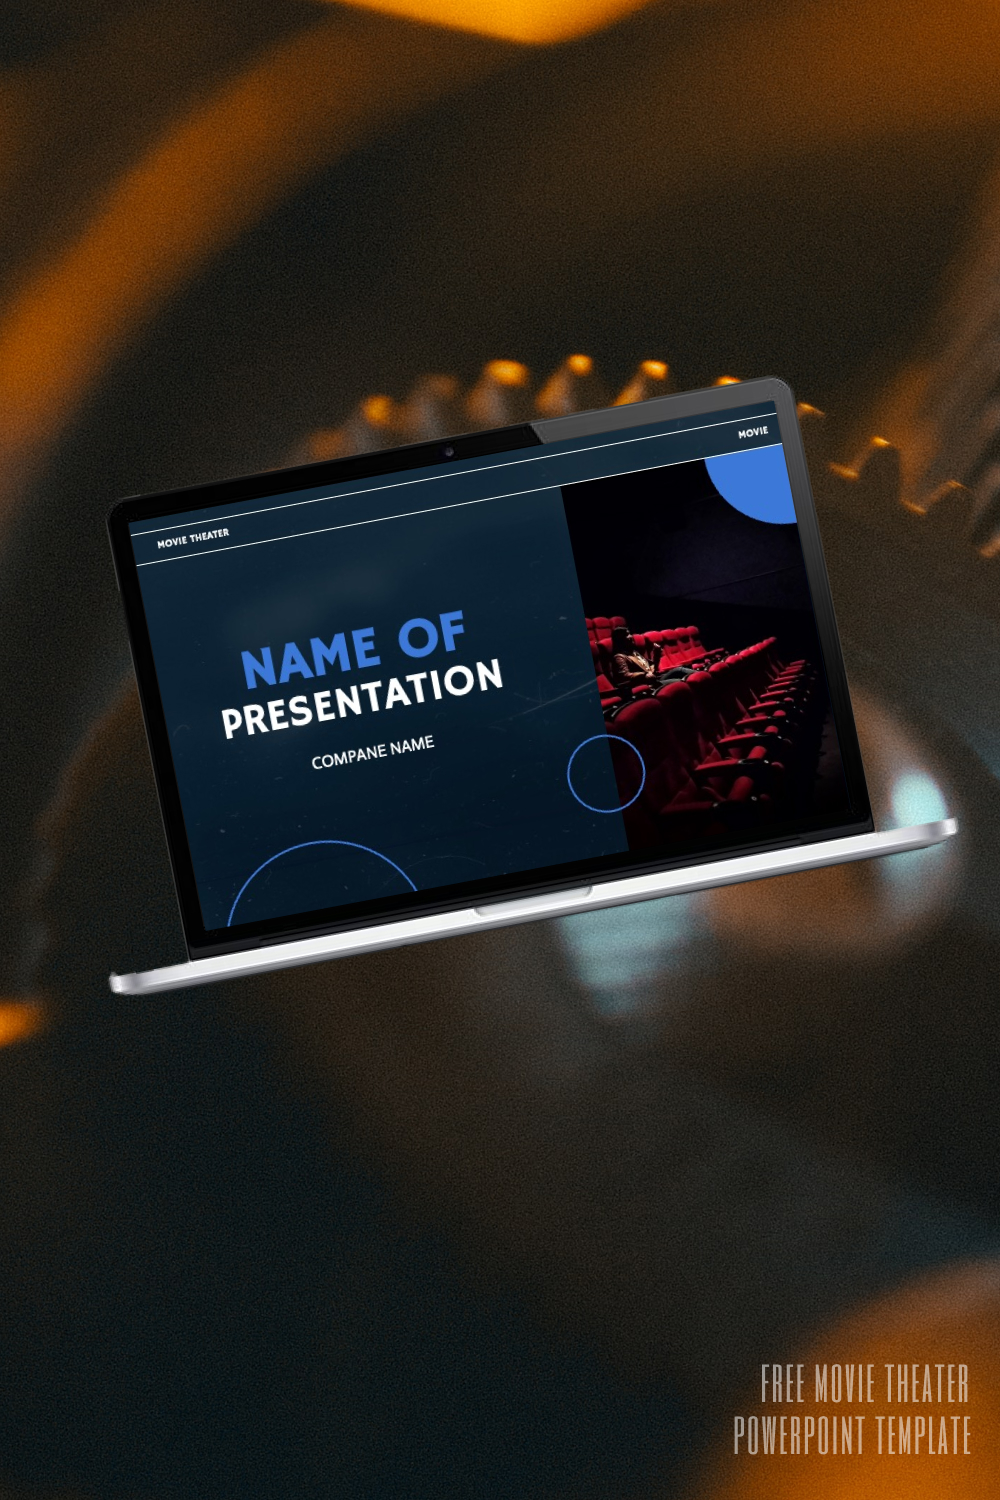 Presentations on the computer.